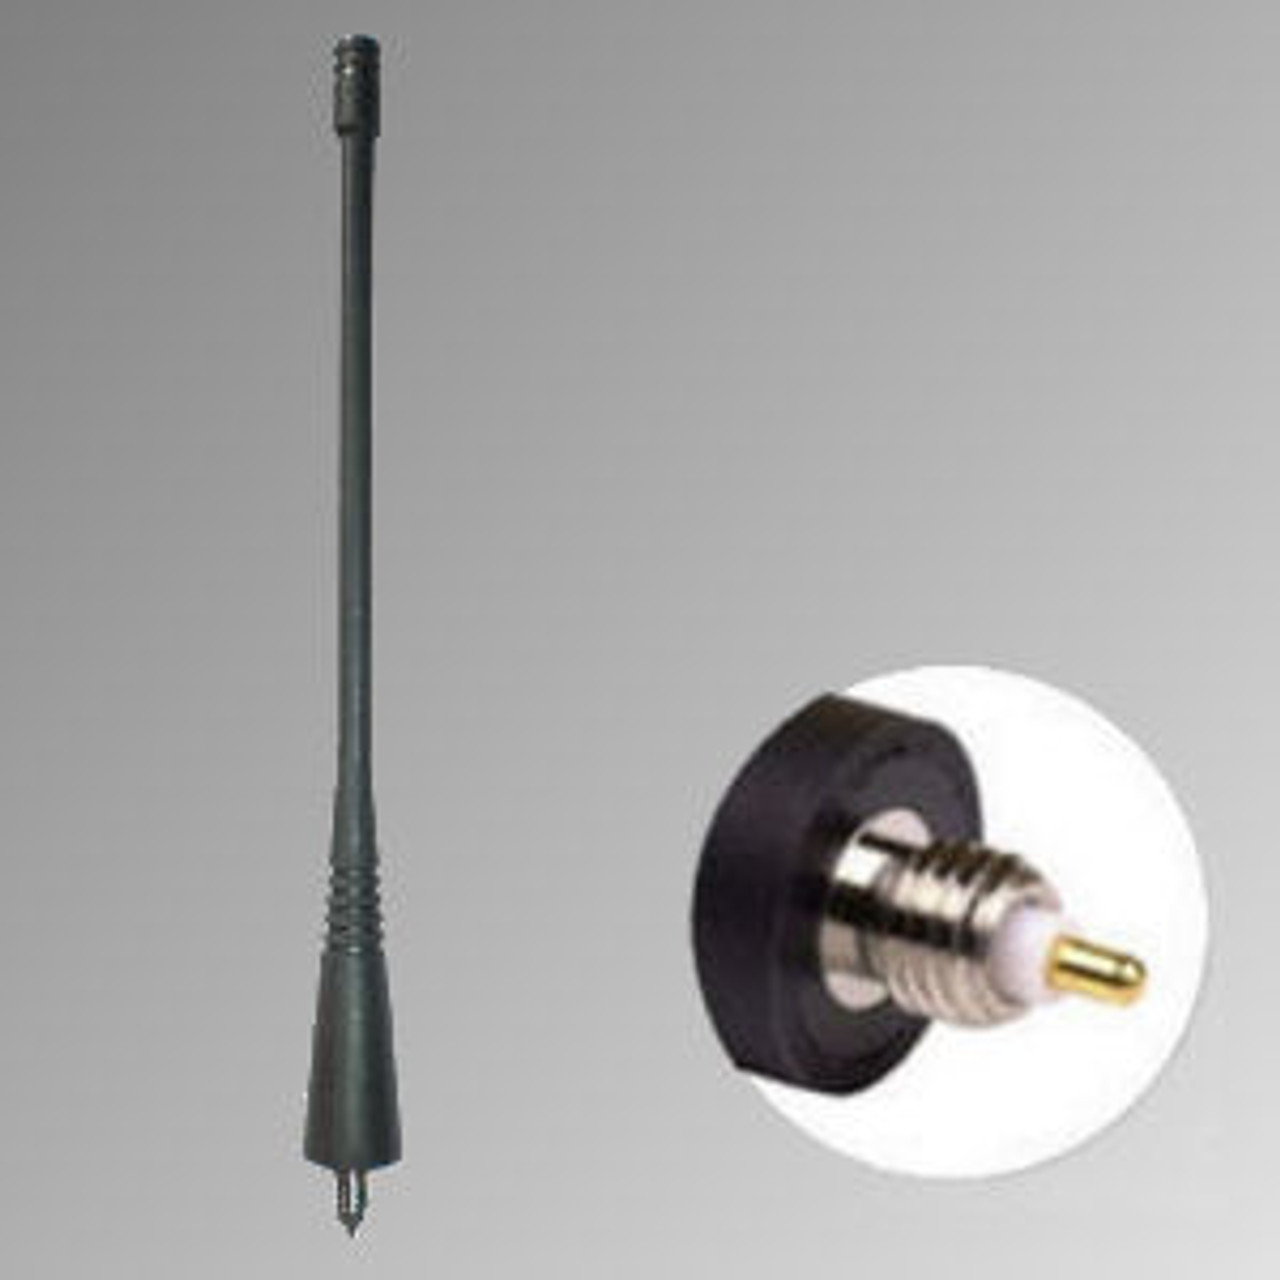 M/A-Com LPE-50 1/2 Wave Extended Range Antenna - 5.7", Dual-Band, 698-870 MHz